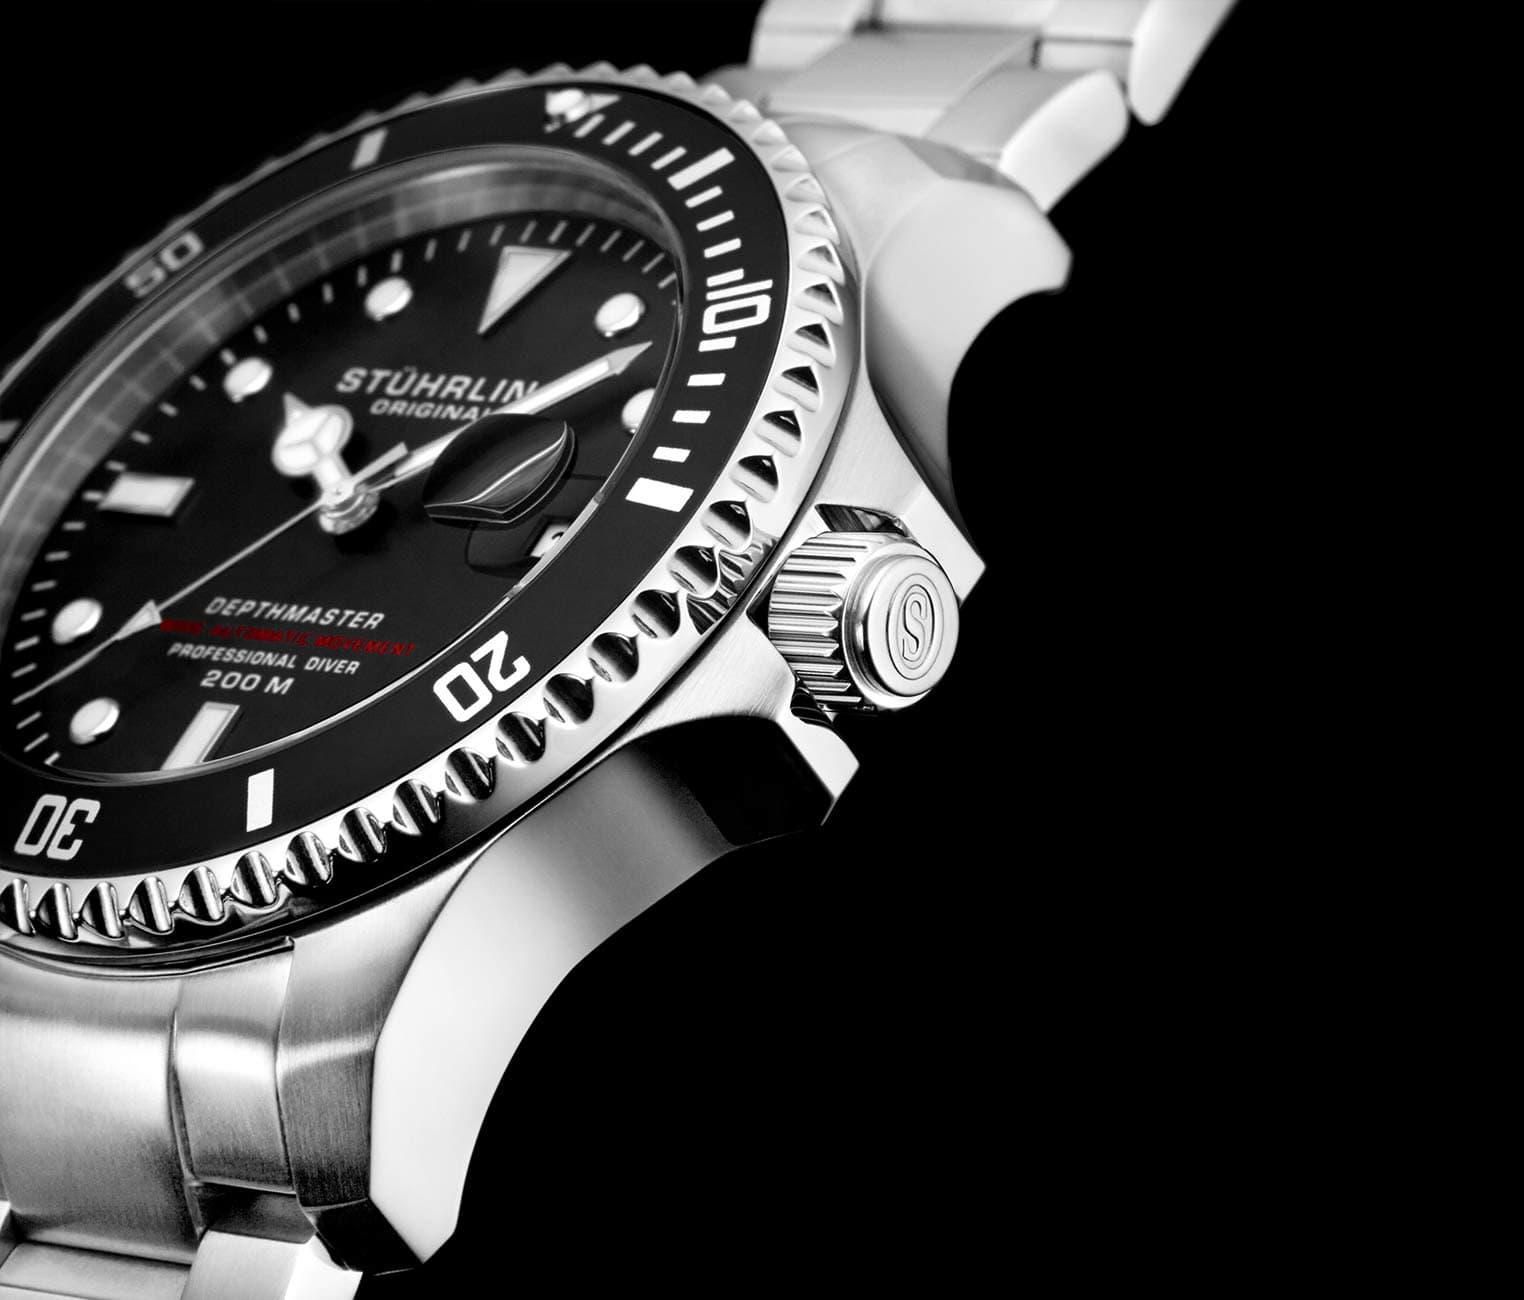 Swiss Automatic Depthmaster 883 42mm Diver